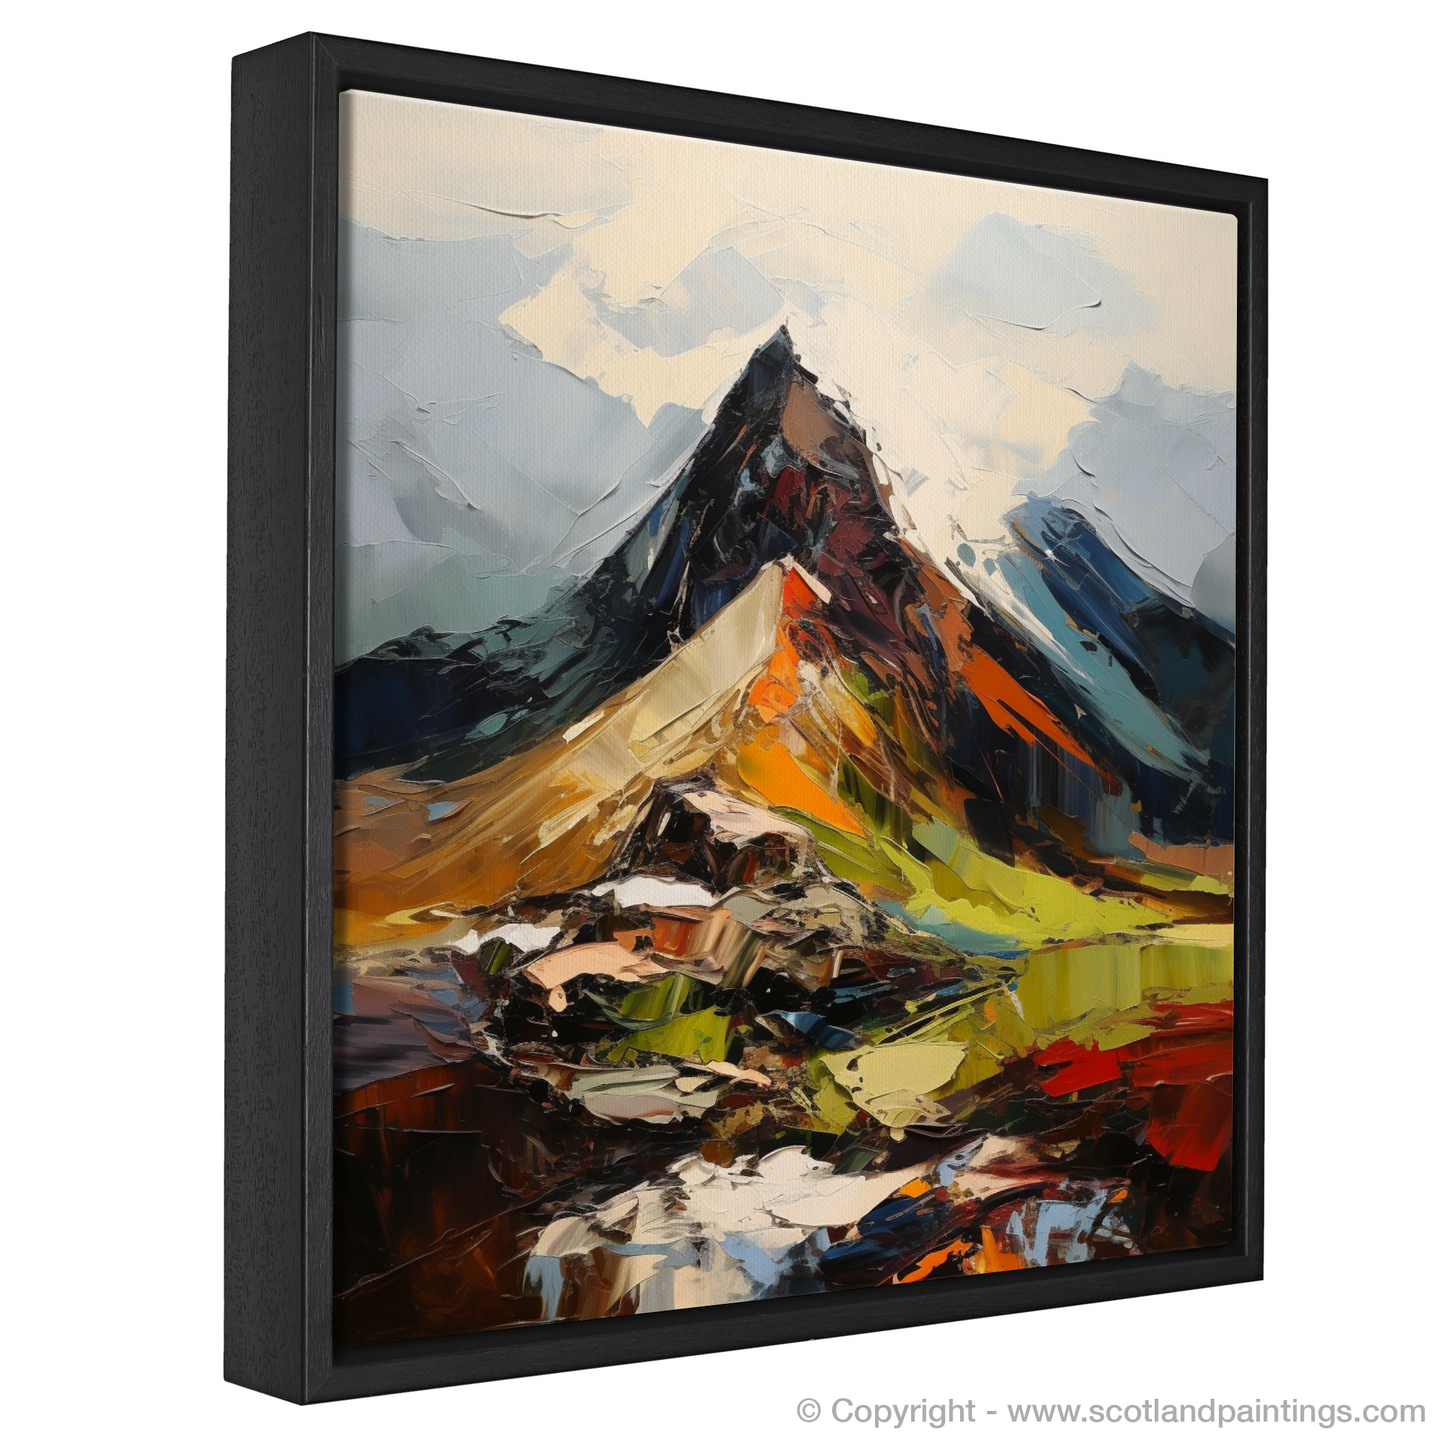 Painting and Art Print of Cairn Gorm, Highlands entitled "Cairn Gorm Unleashed: An Expressionist Ode to the Highlands".